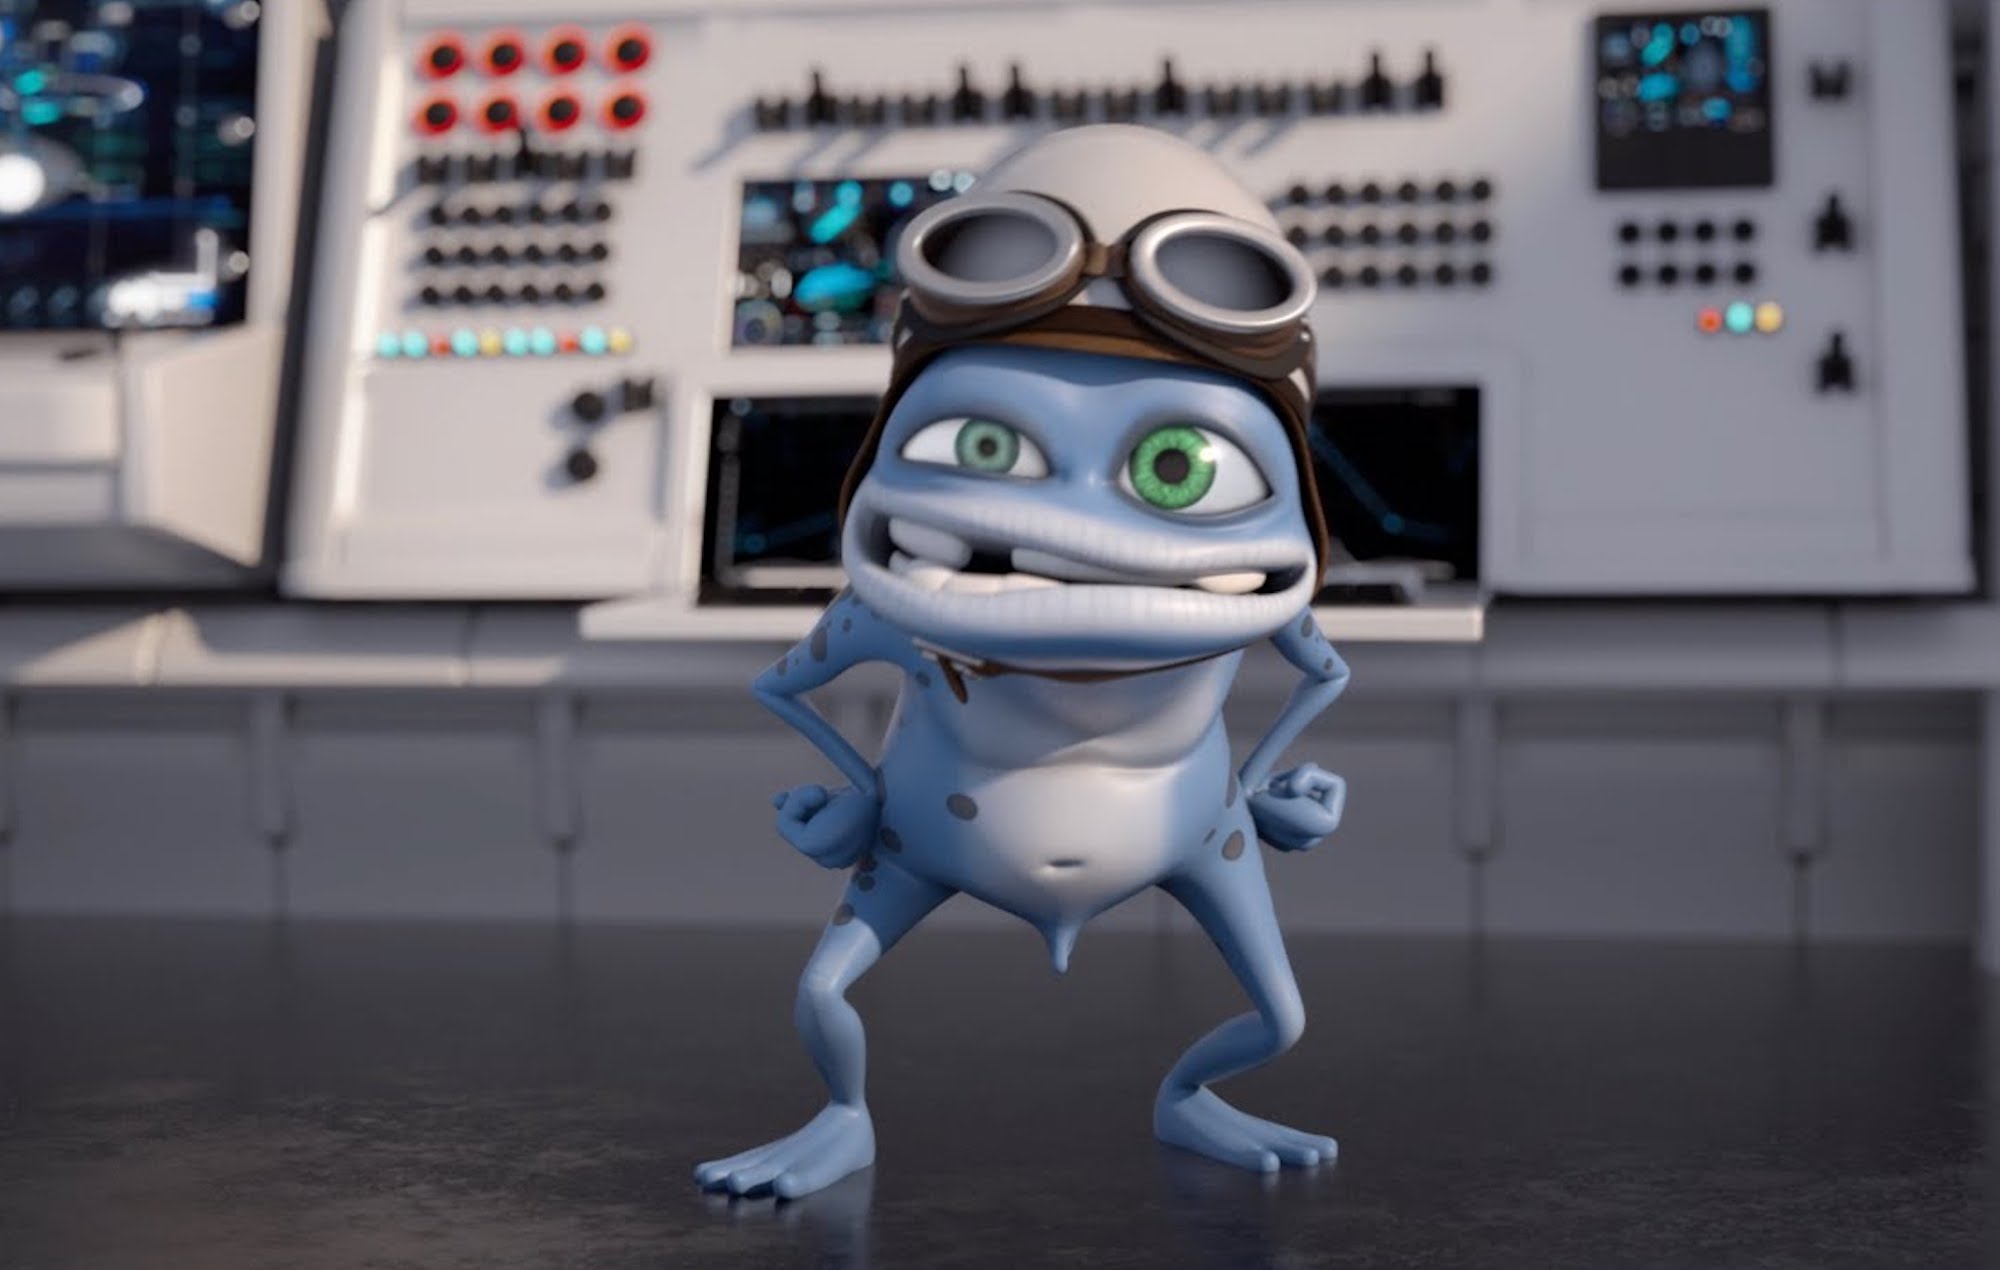 Crazy Frog returns, like it or not: 'There will always be a place